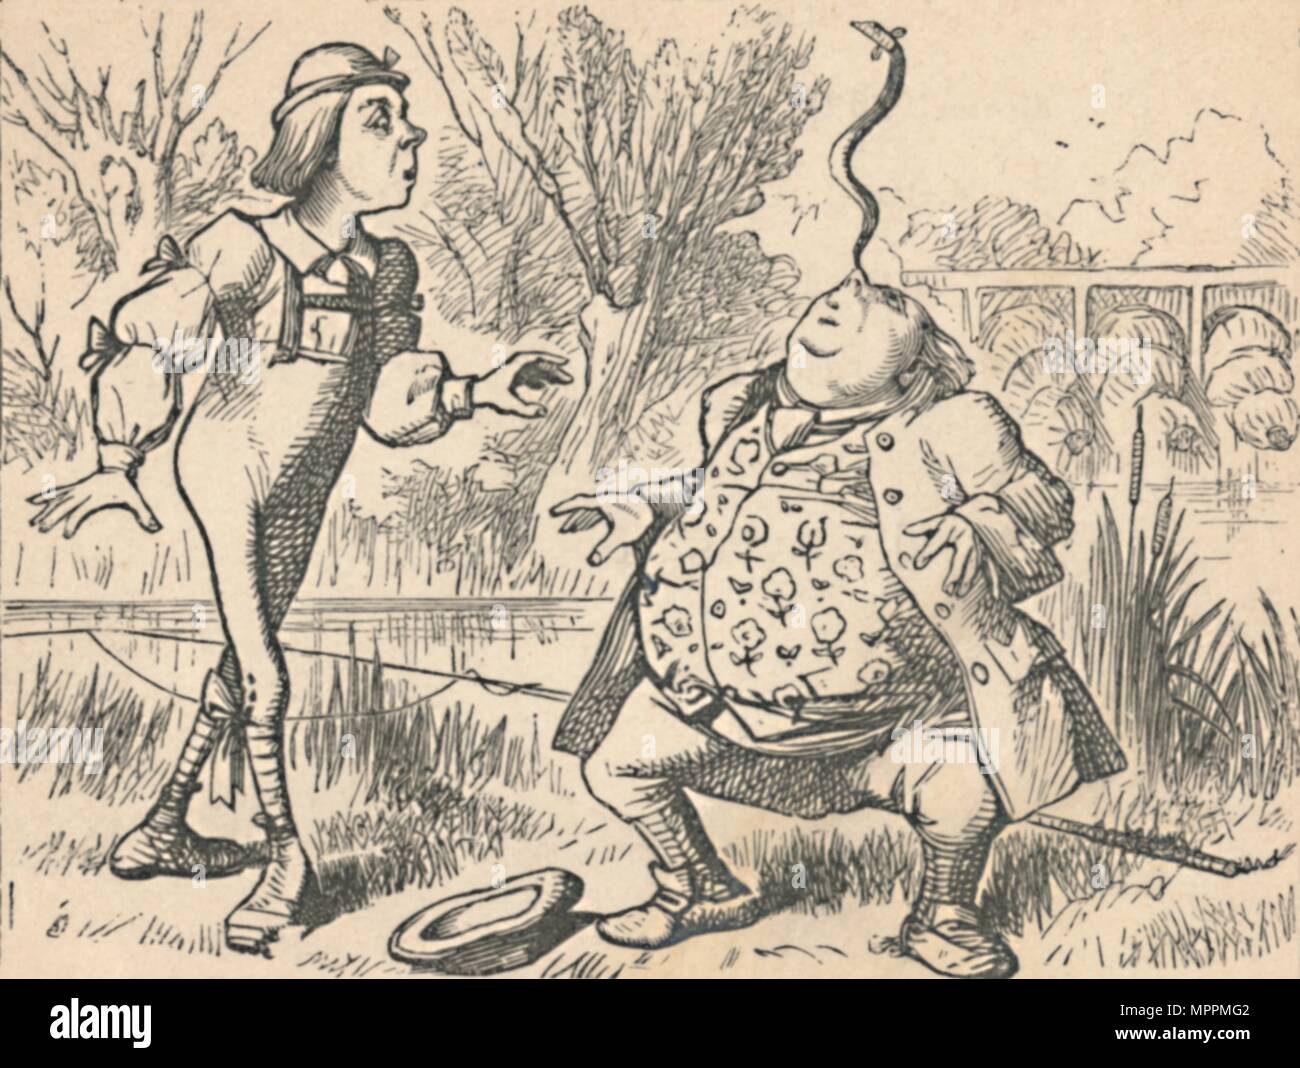 'The youth and his father, who is balancing a fish on his nose', 1889. Artist: John Tenniel. Stock Photo